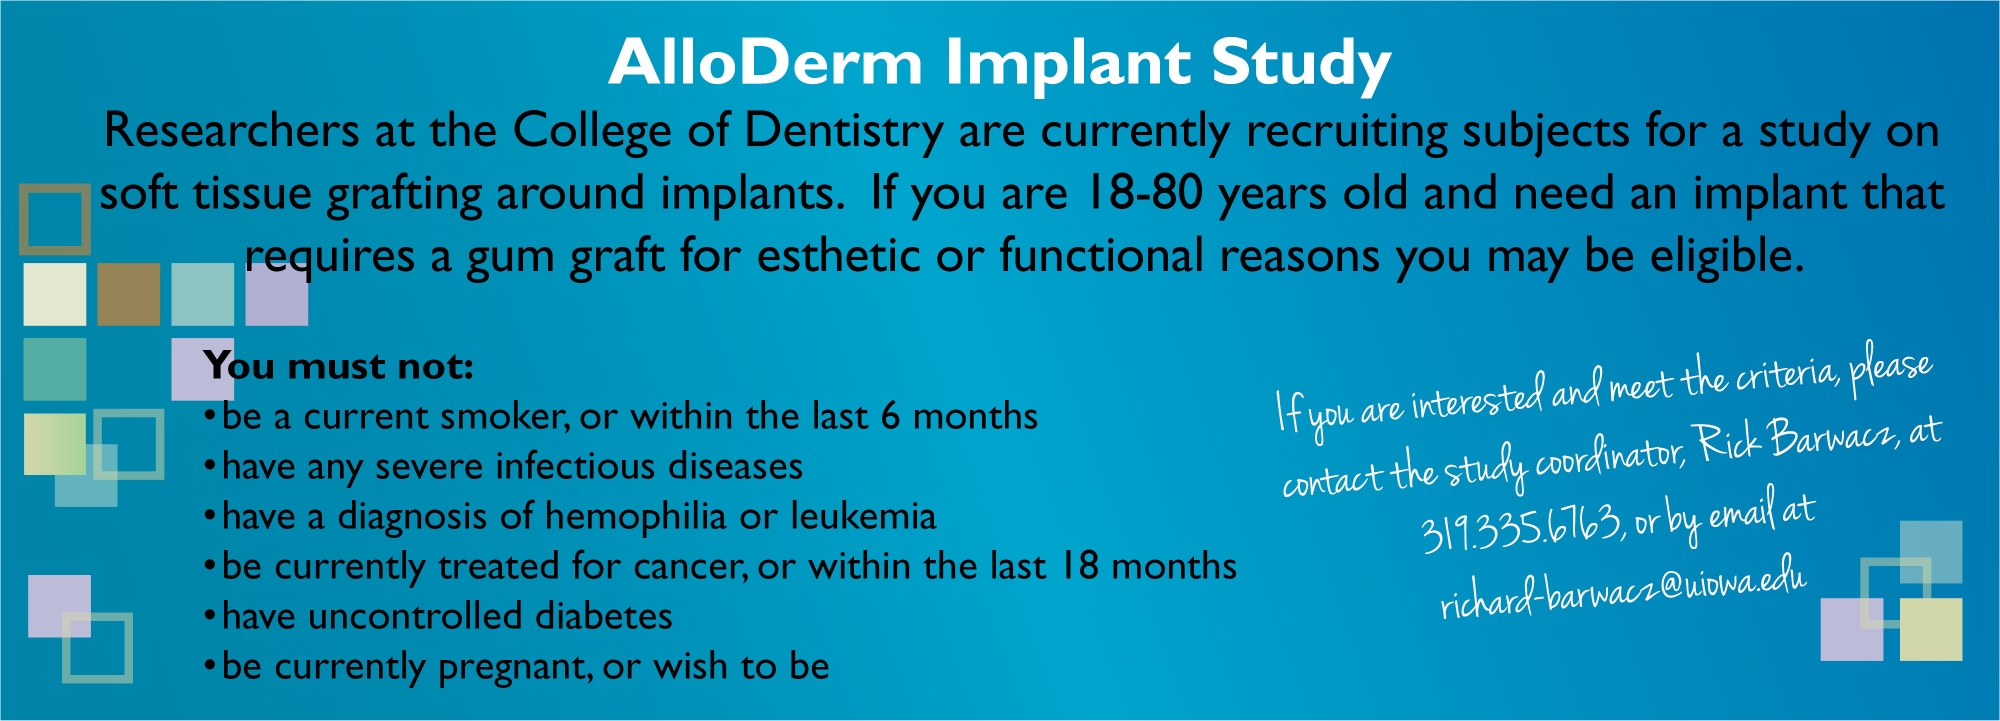 research_allodern_implant